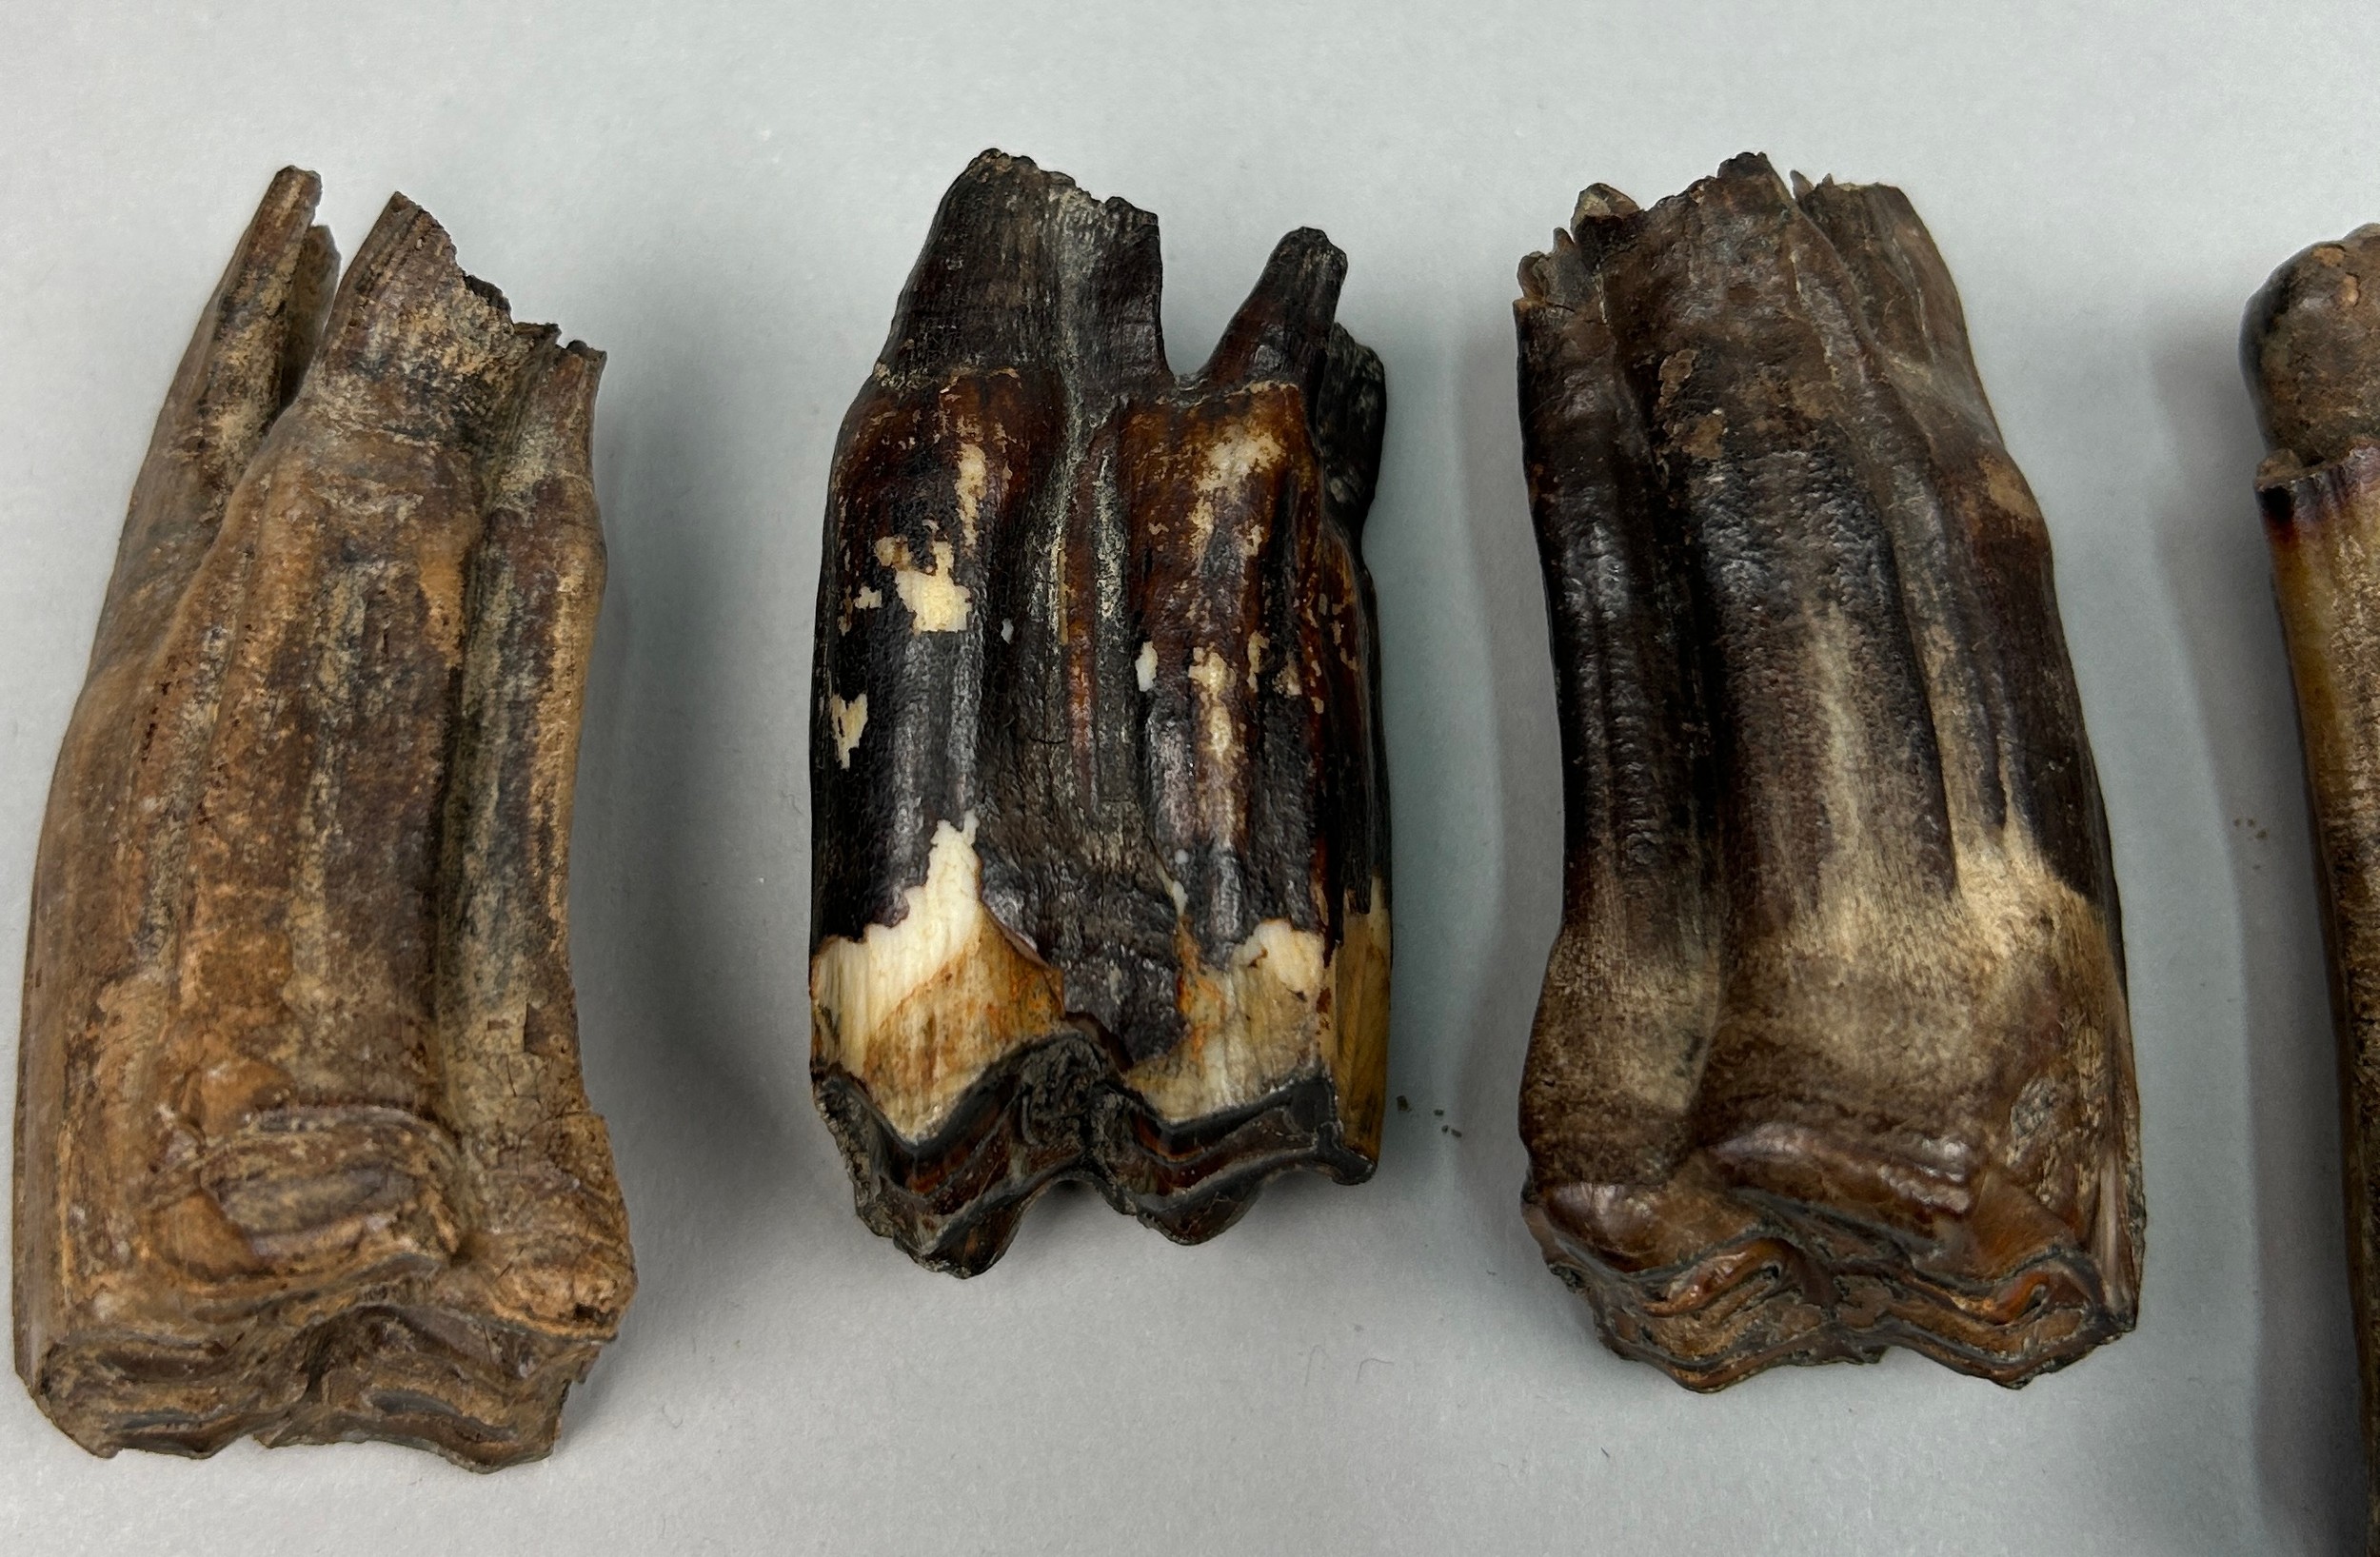 A COLLECTION OF PROBABLY BRONZE AGE PARTIALLY FOSSILISED HORSE TEETH ALONG WITH TWO HUMAN TEETH IN A - Image 5 of 5